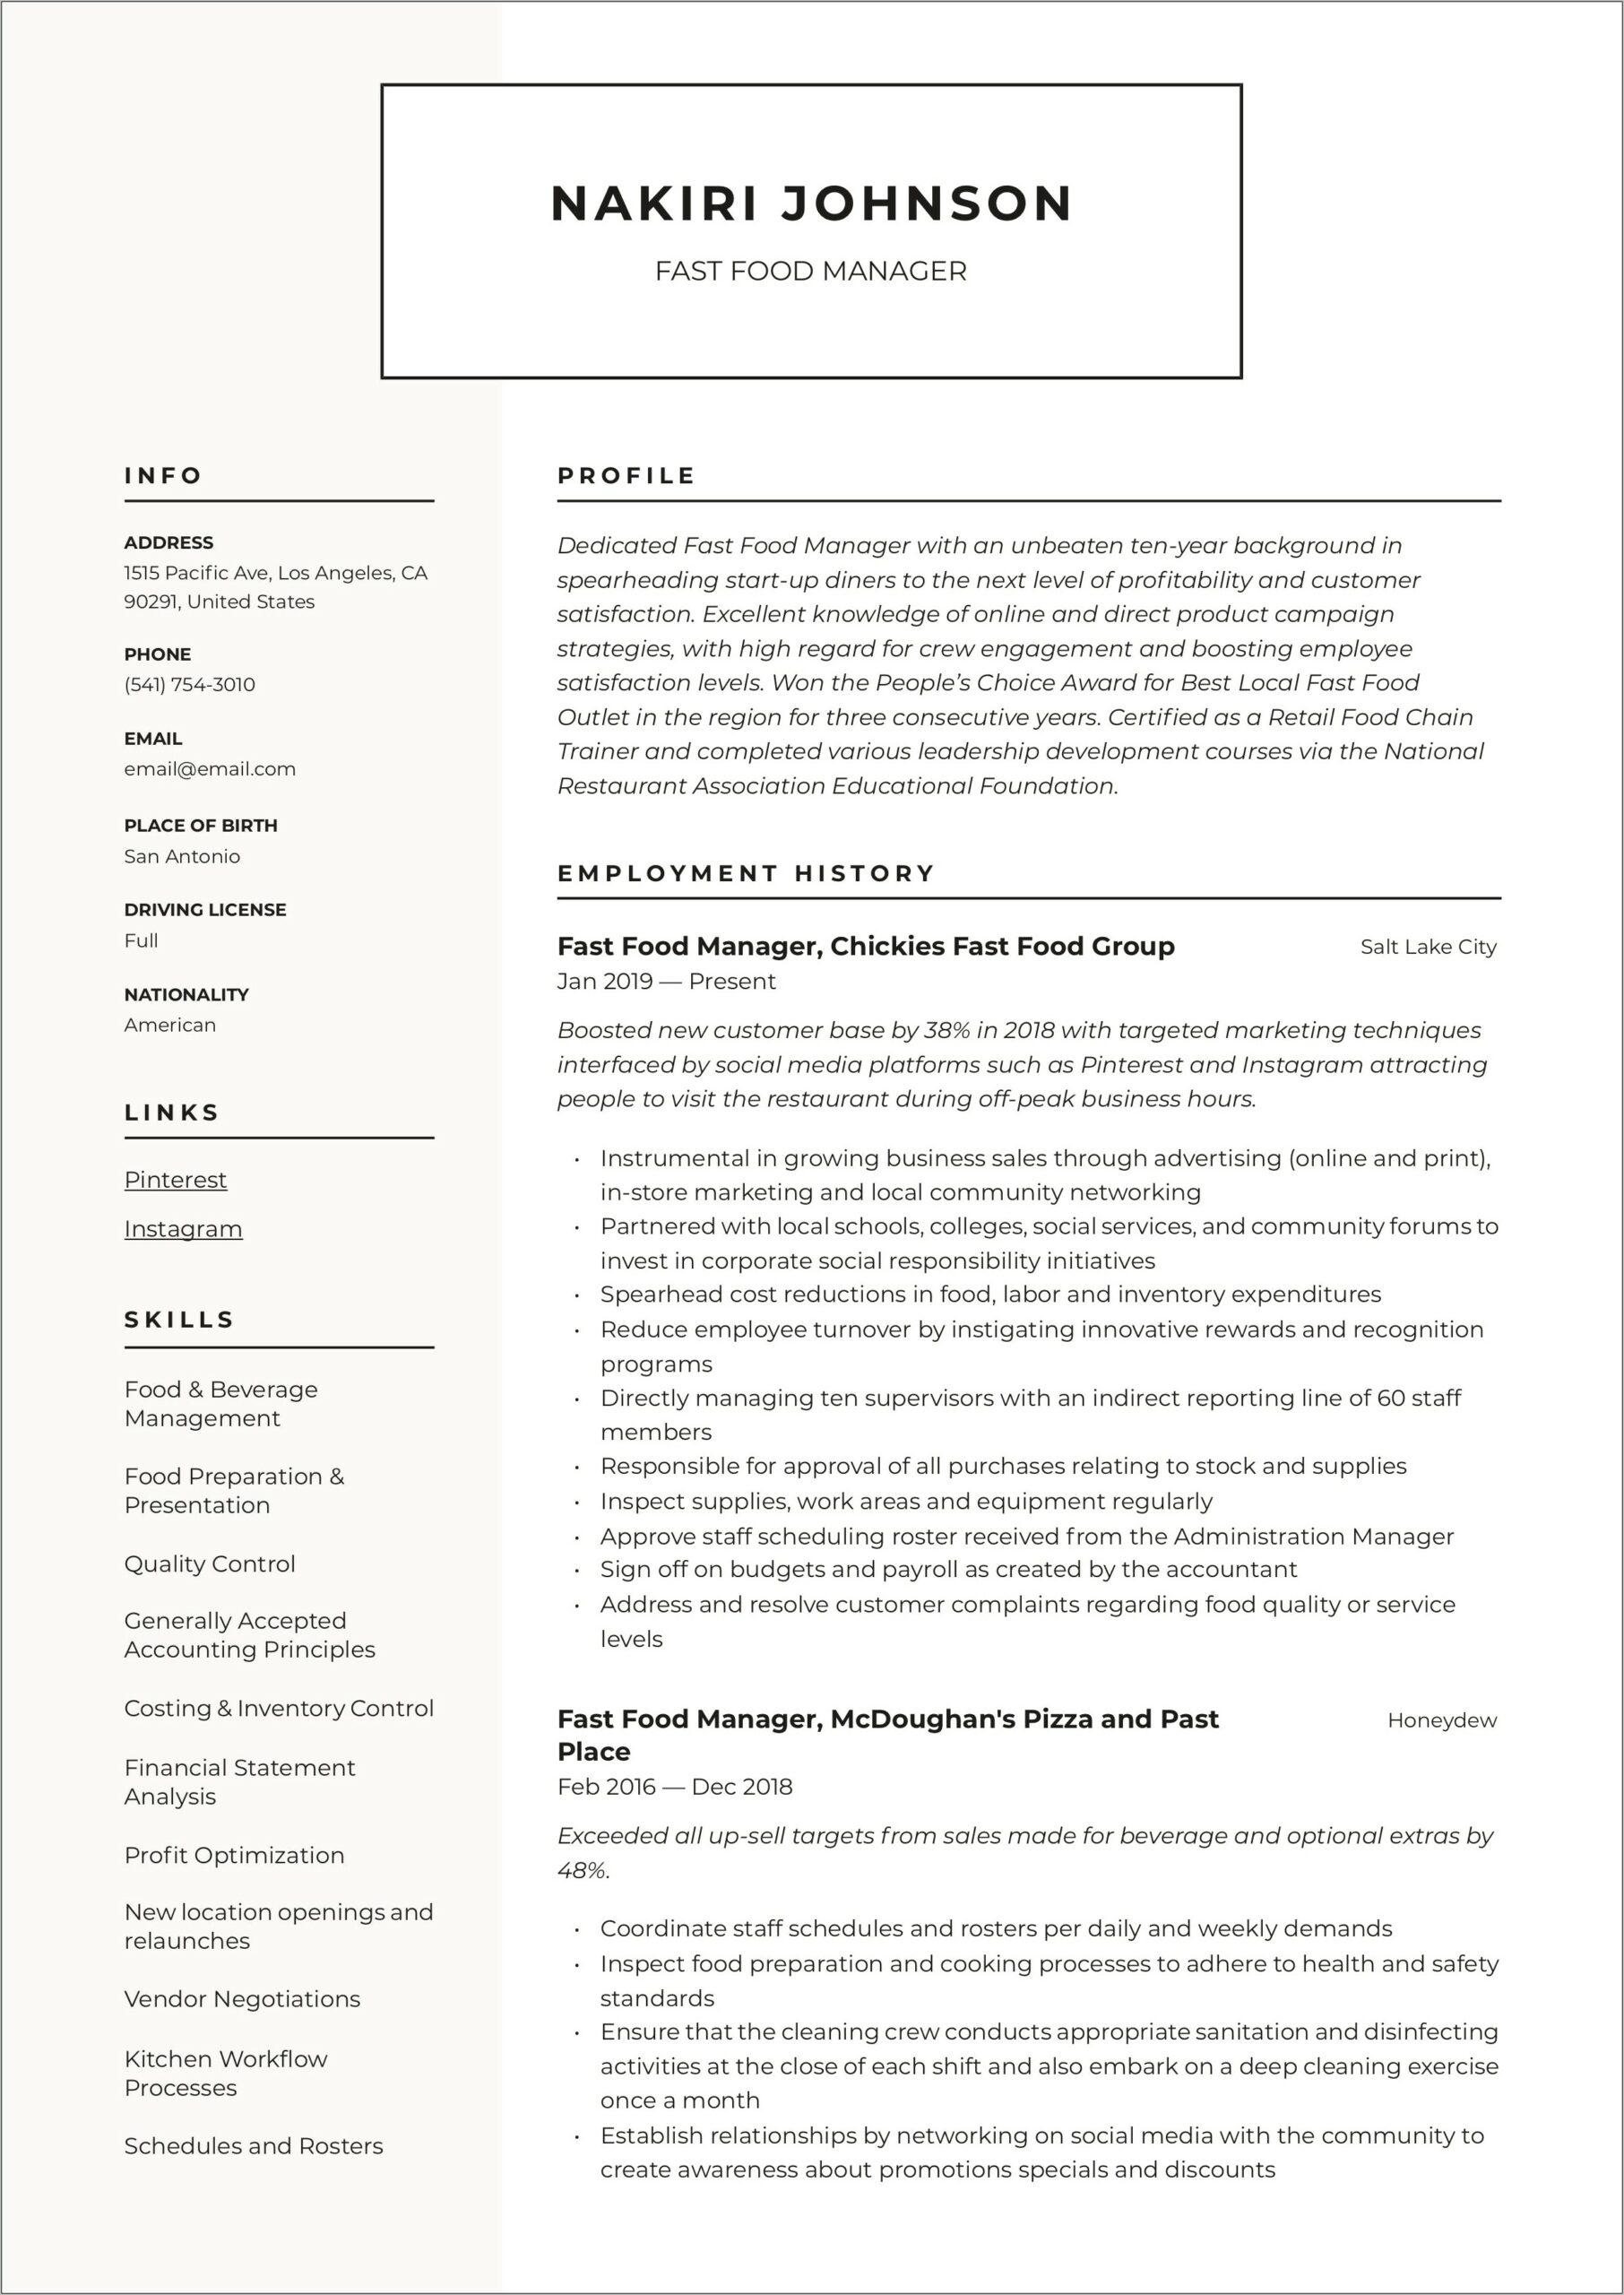 Restaurant Manager Cost Analysis Resume